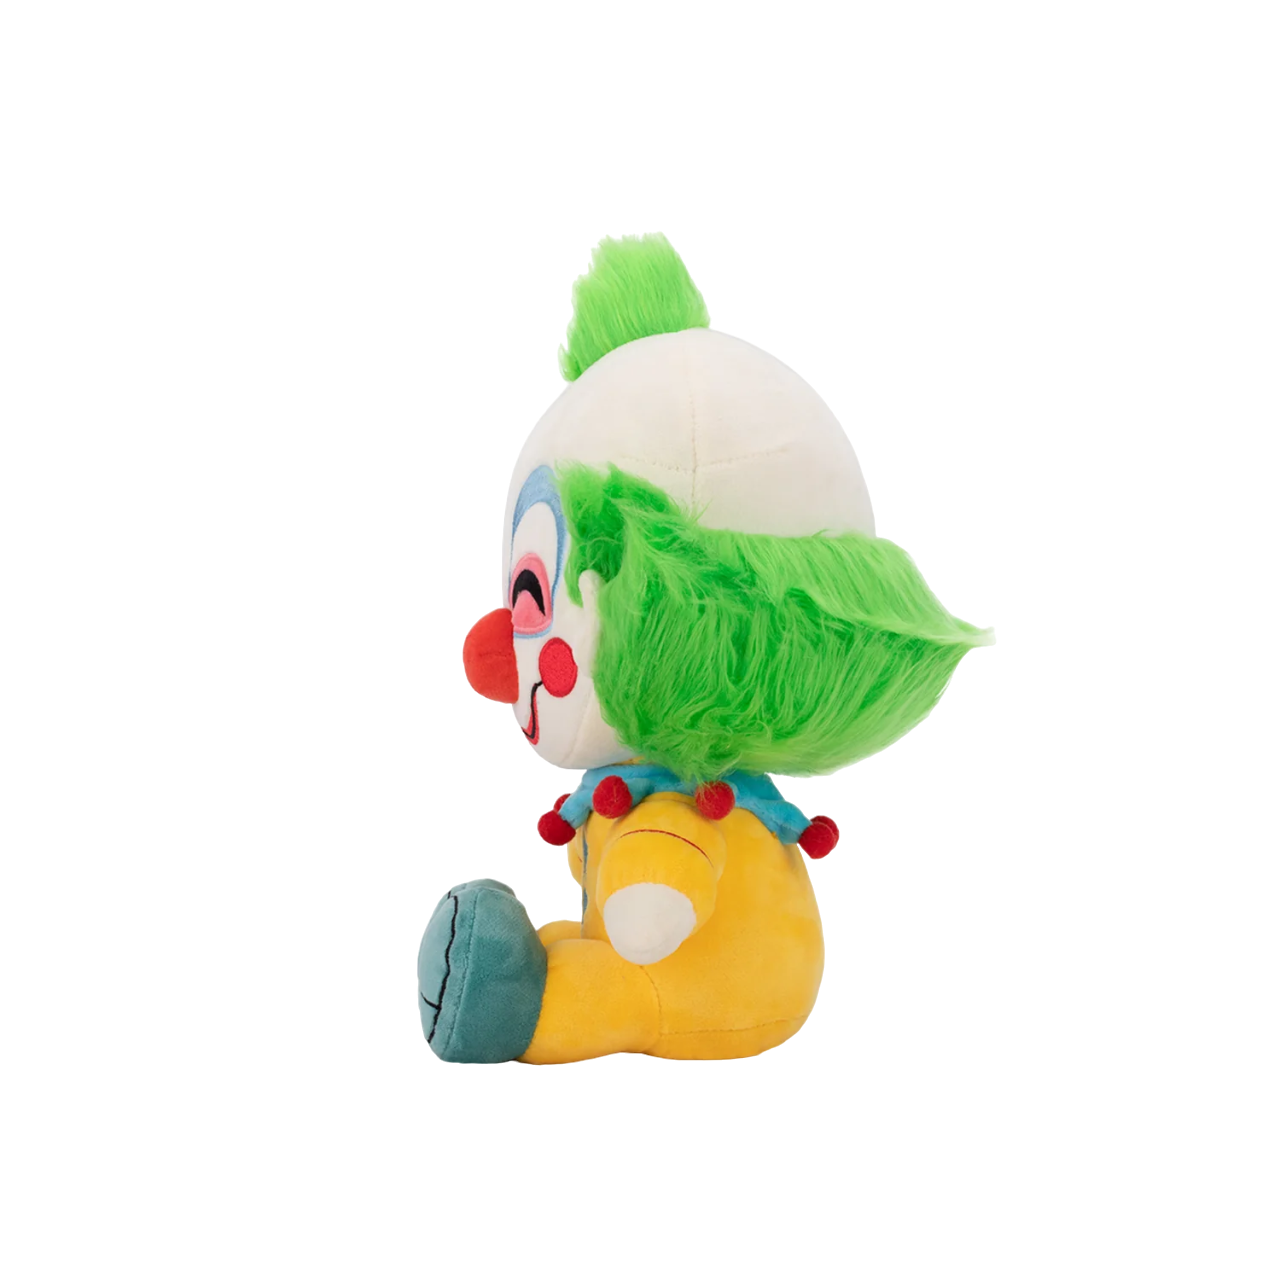 Killer Clowns from Outer Space Youtooz Plush (9IN)